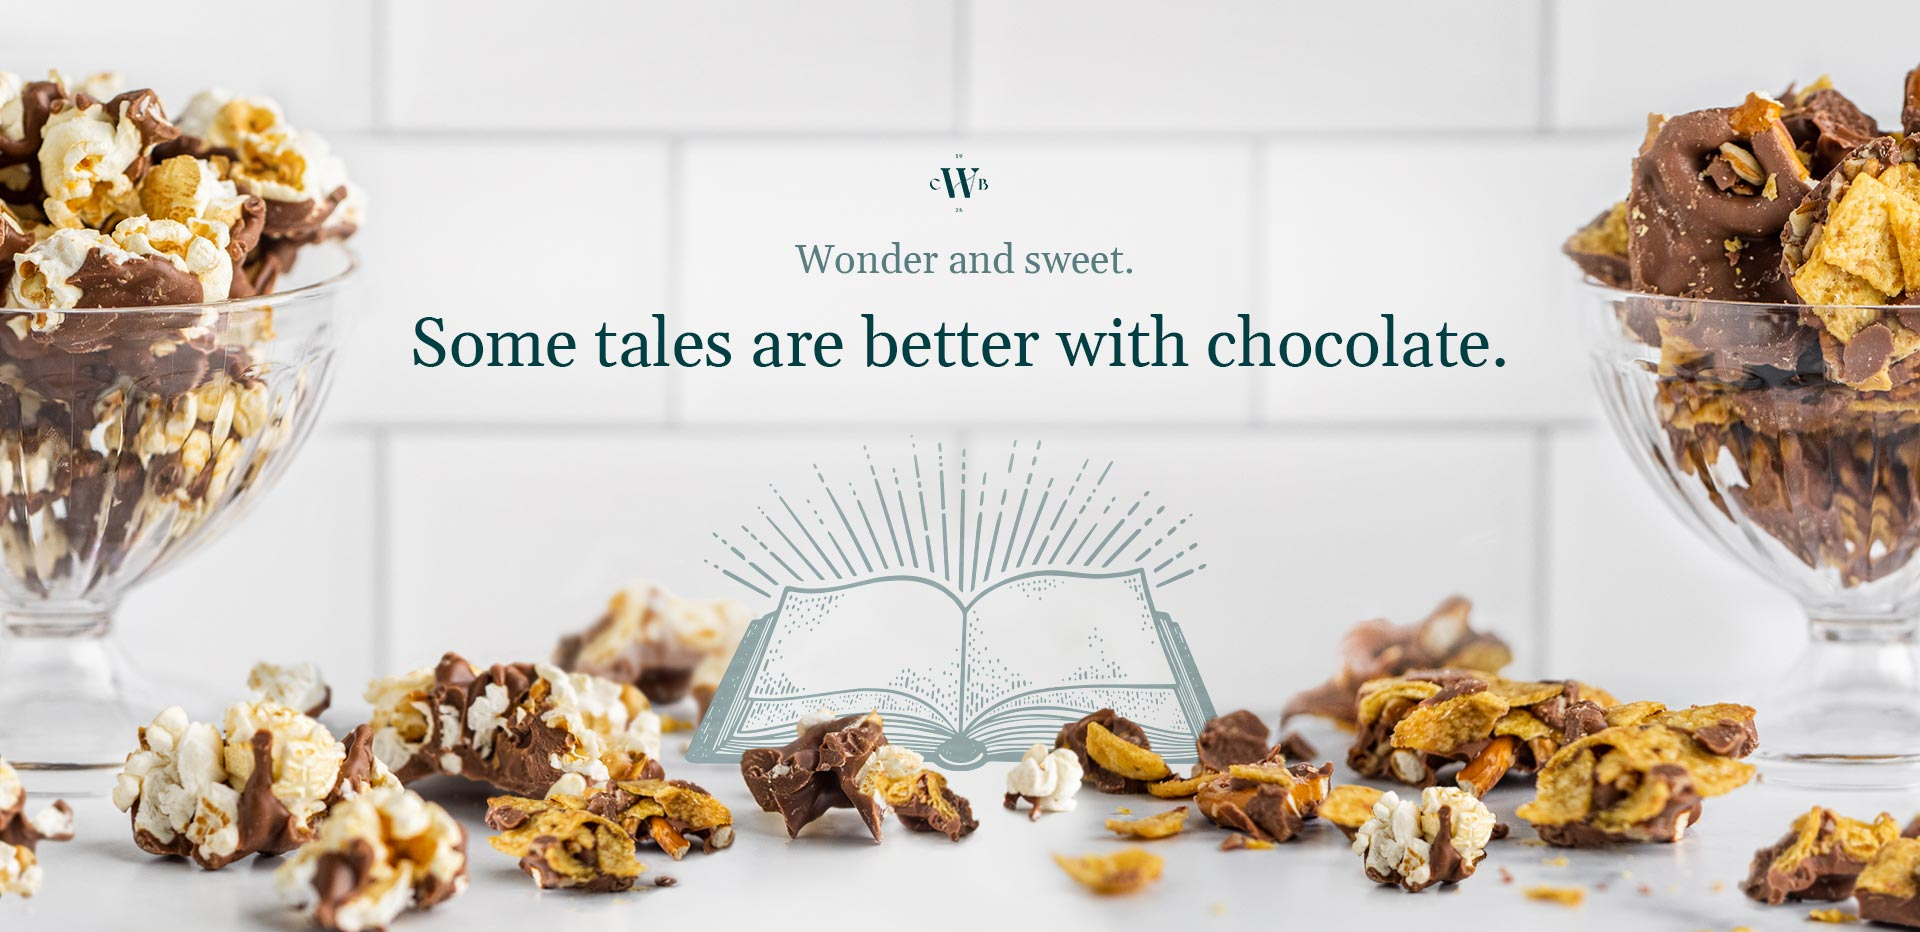 Wonder and sweet. Some tales are better with chocolate.